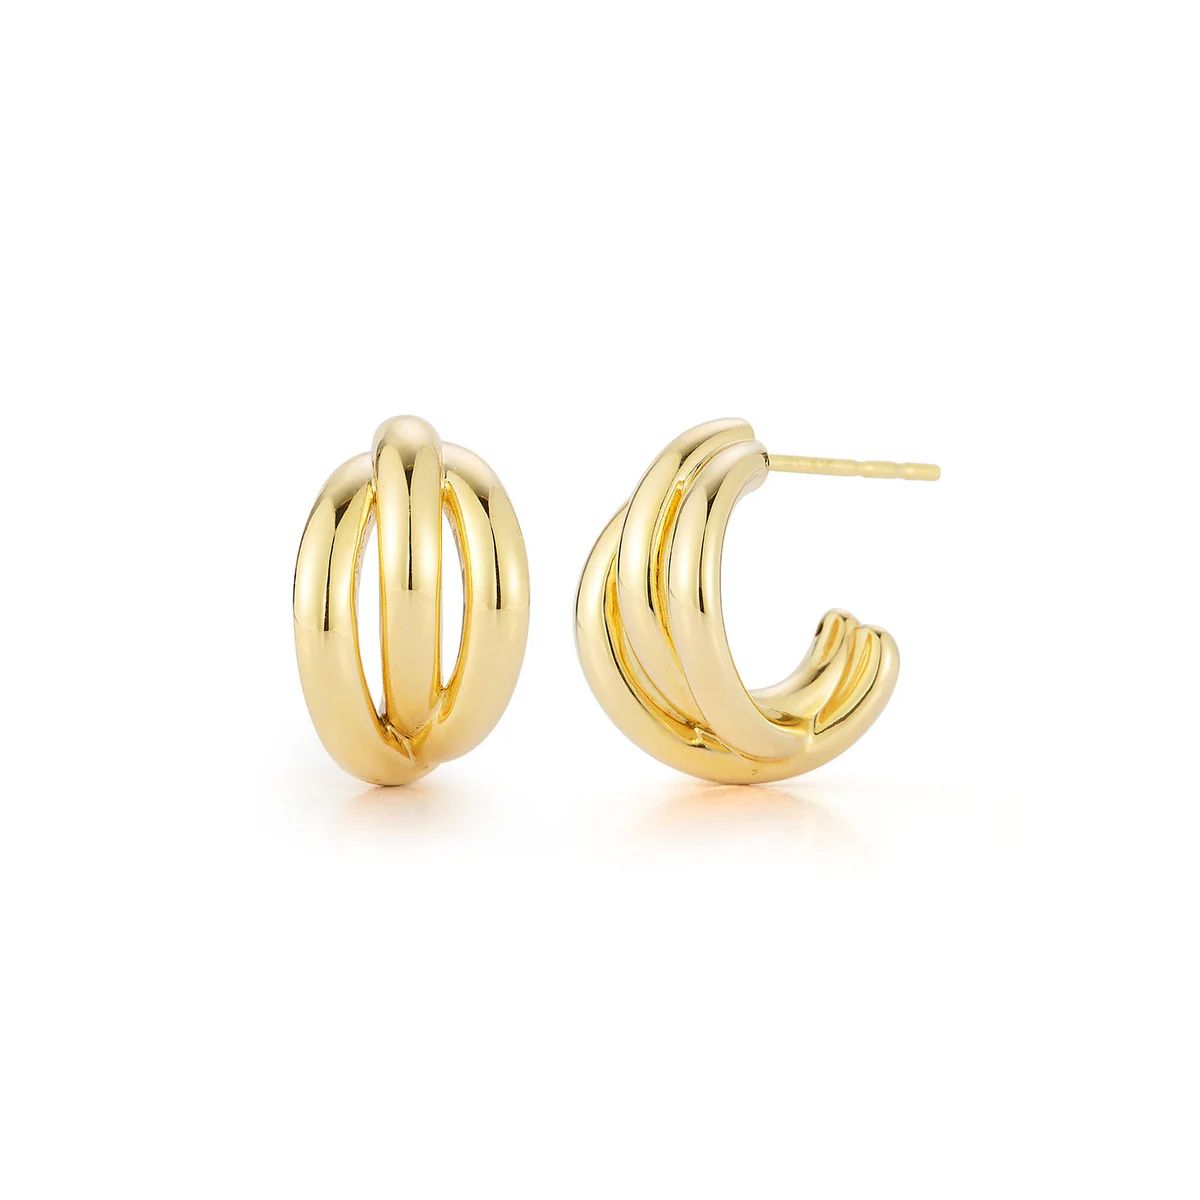 Gold Knot Huggie Earrings14k Yellow Gold / Pair | EF Collection